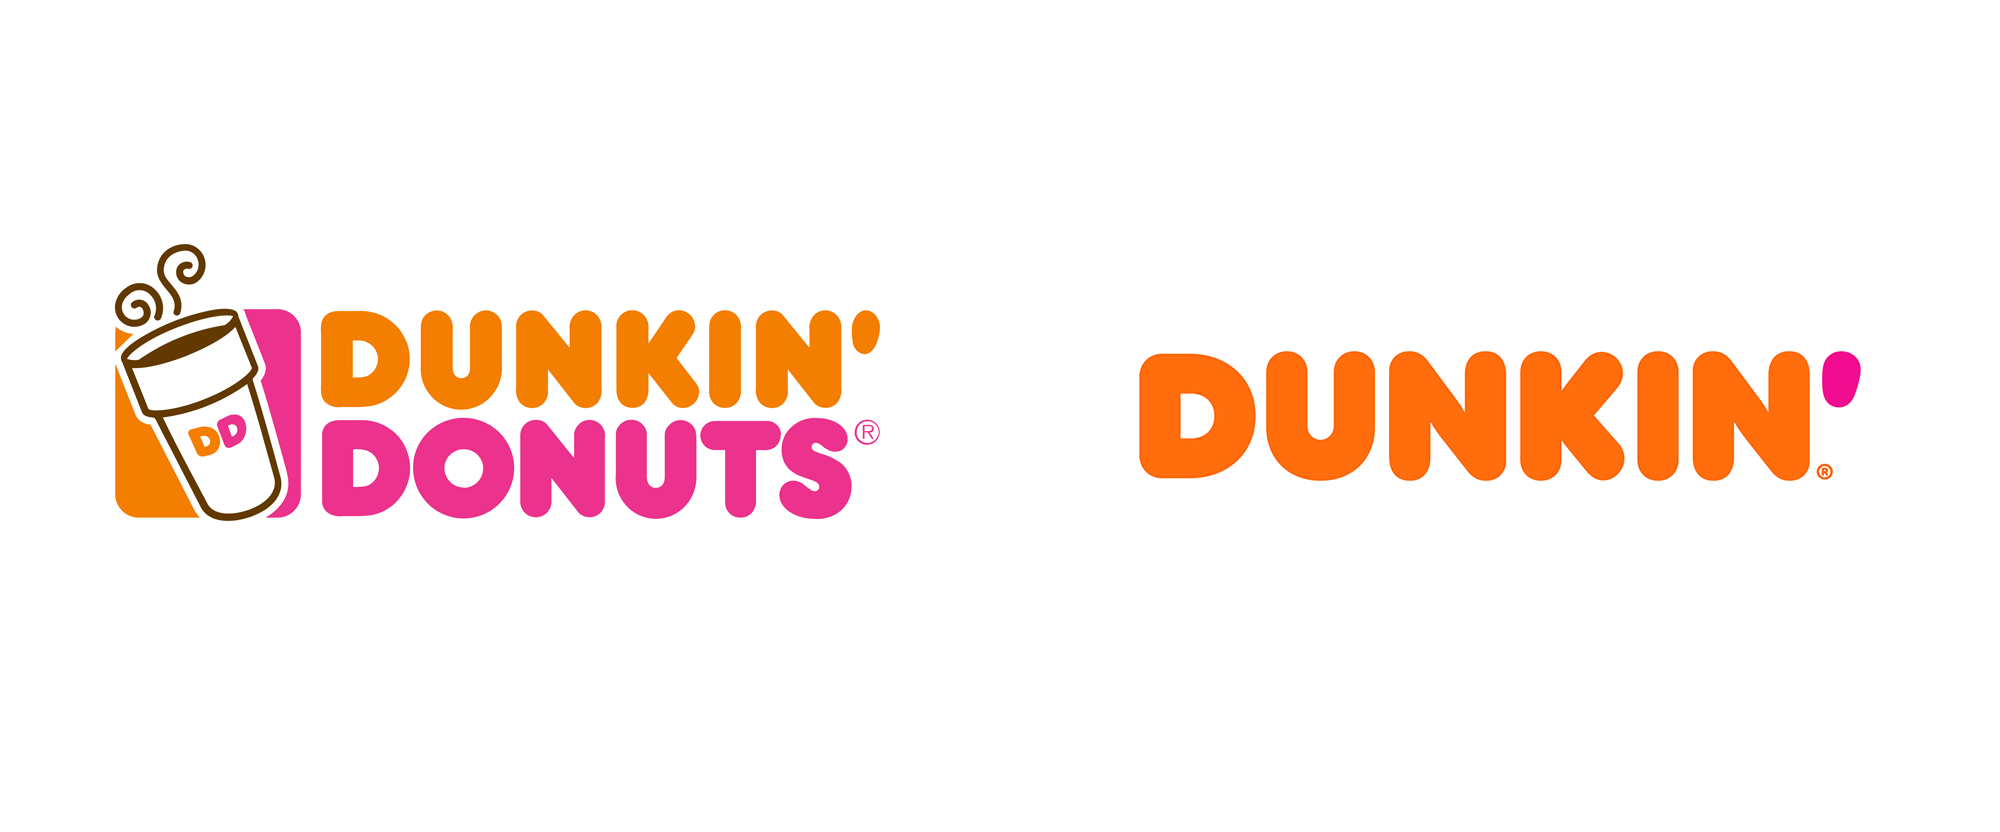 dunkin_logo_before_after